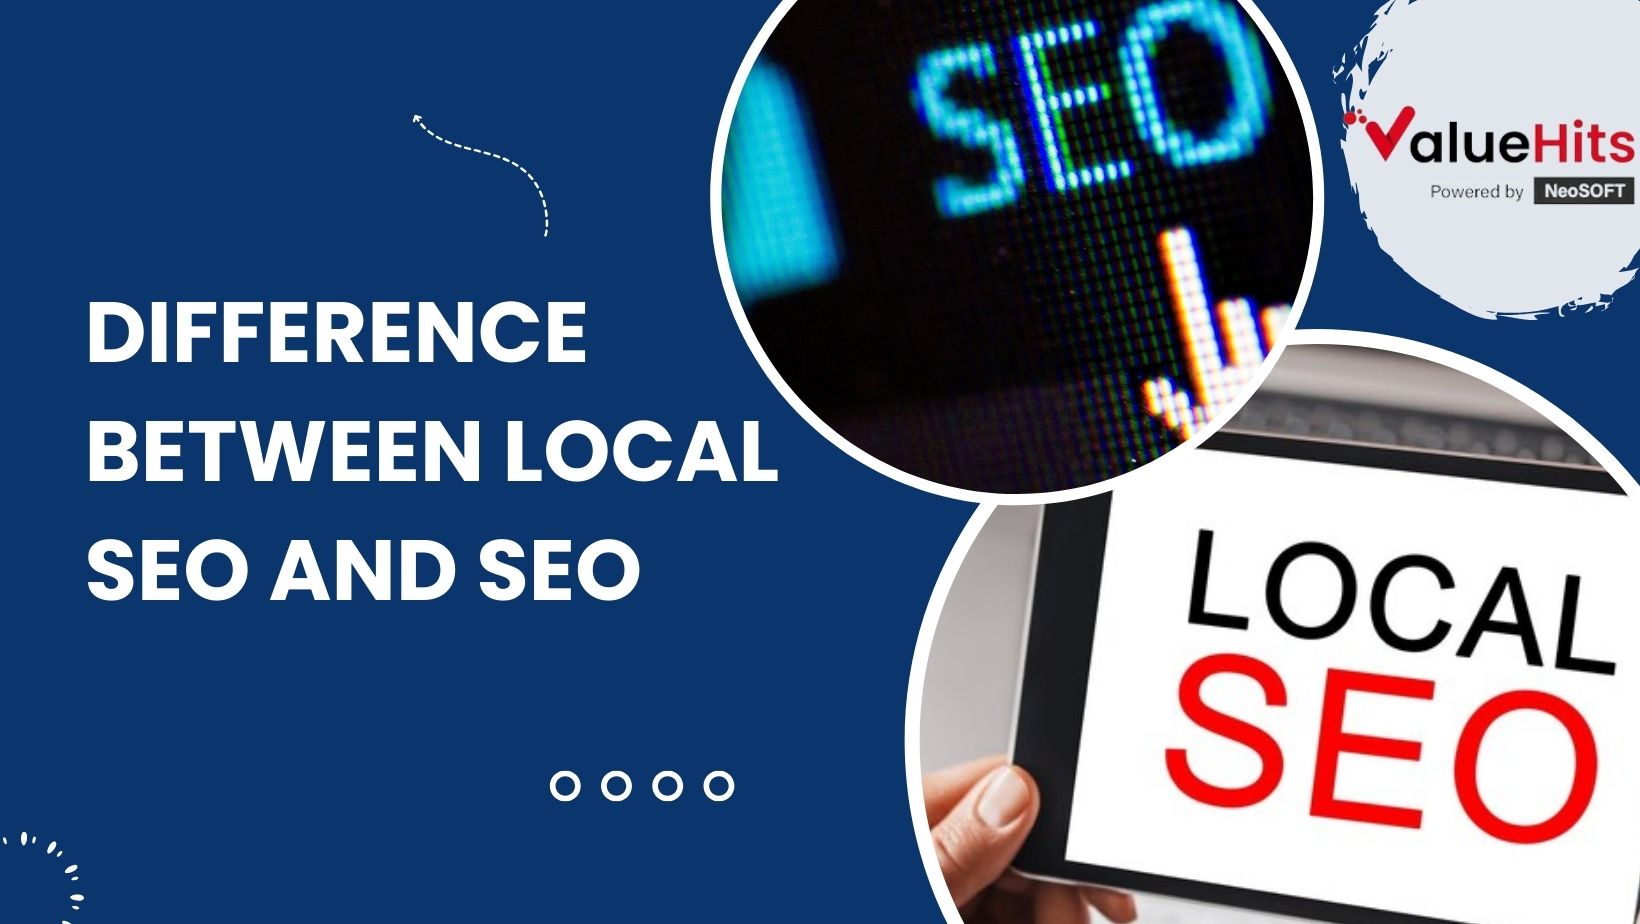 Difference between Local SEO and SEO